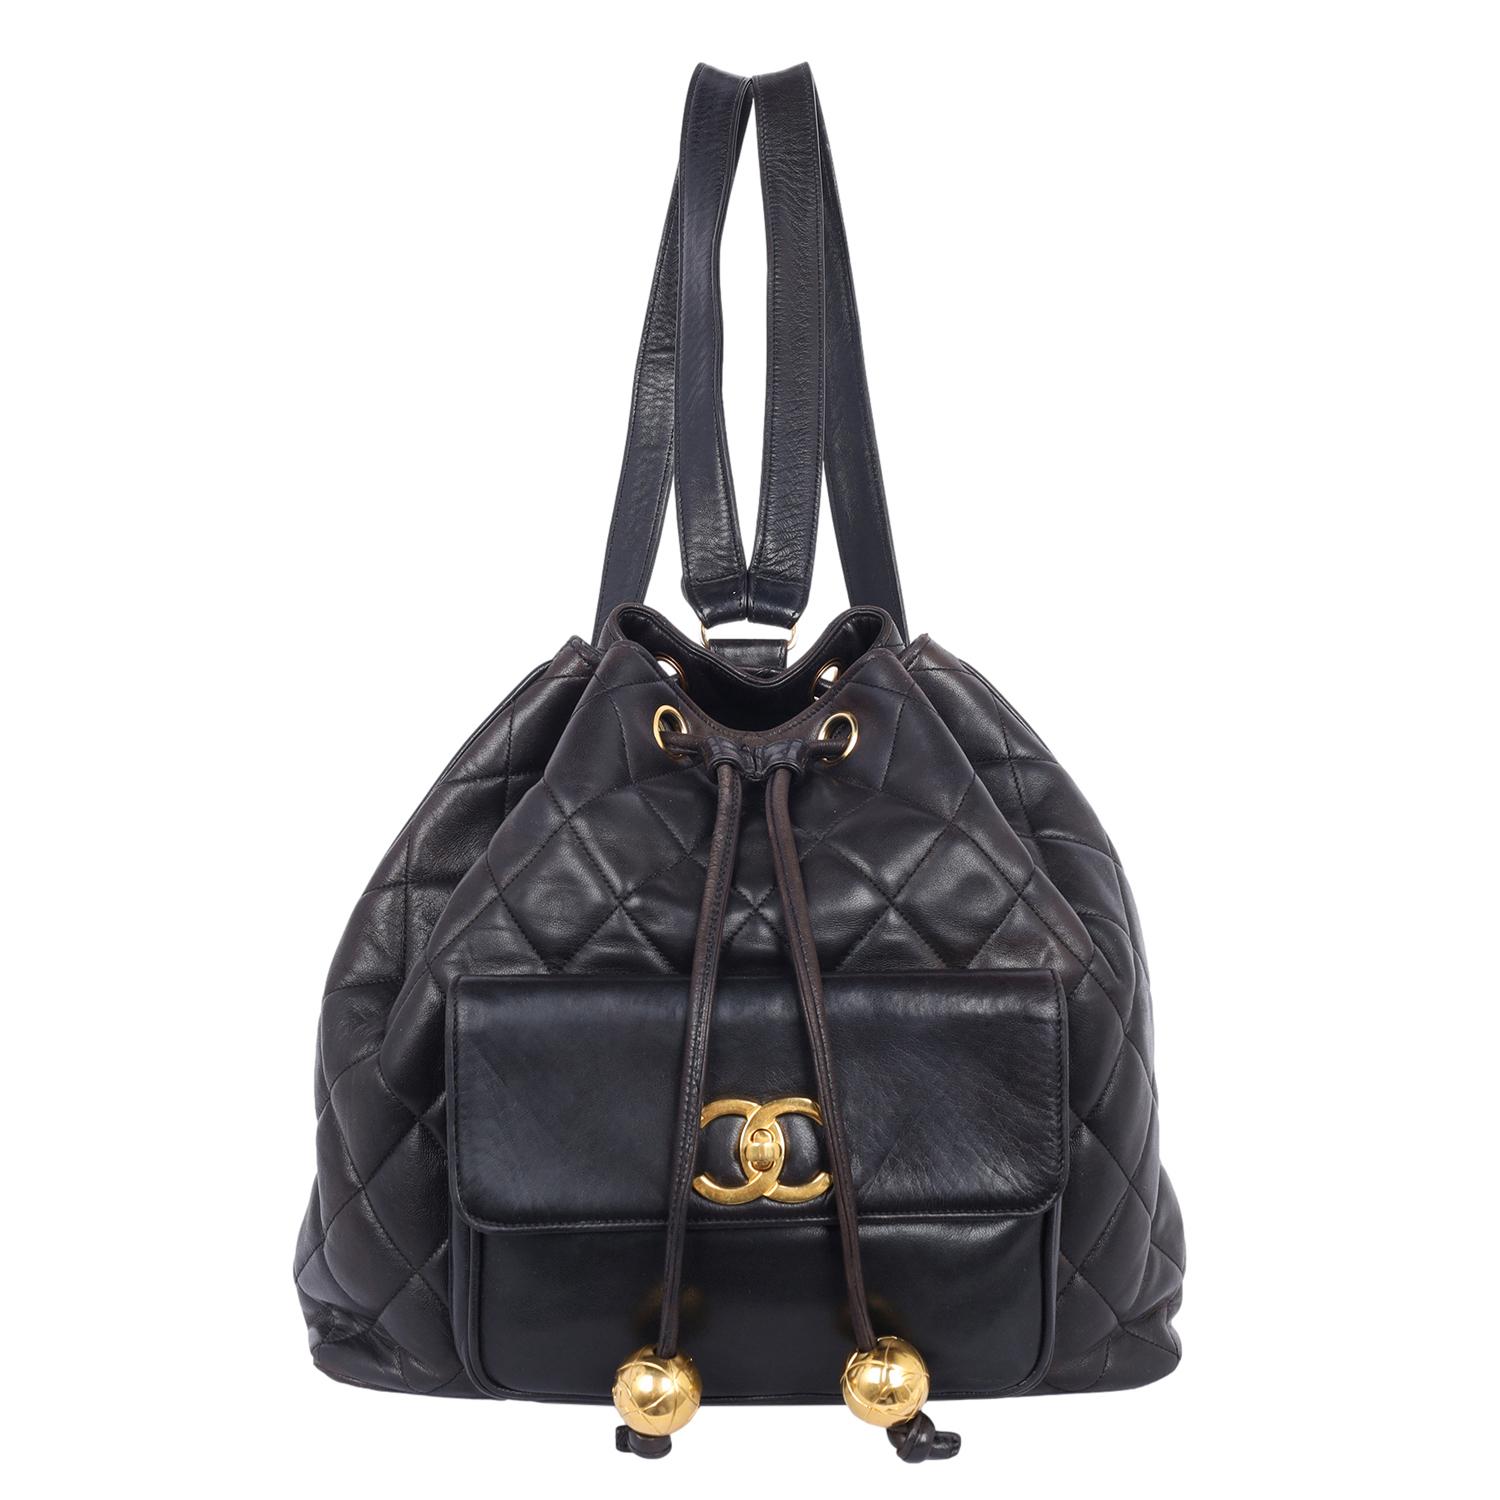 Authentic, pre-loved Chanel vintage black quilted lambskin leather backpack. Features: Signature quilted lambskin leather, drawstring closure, 24 kt gold plated hardware, classic CC turn-lock pocket closure, two main interior zippered pockets, two